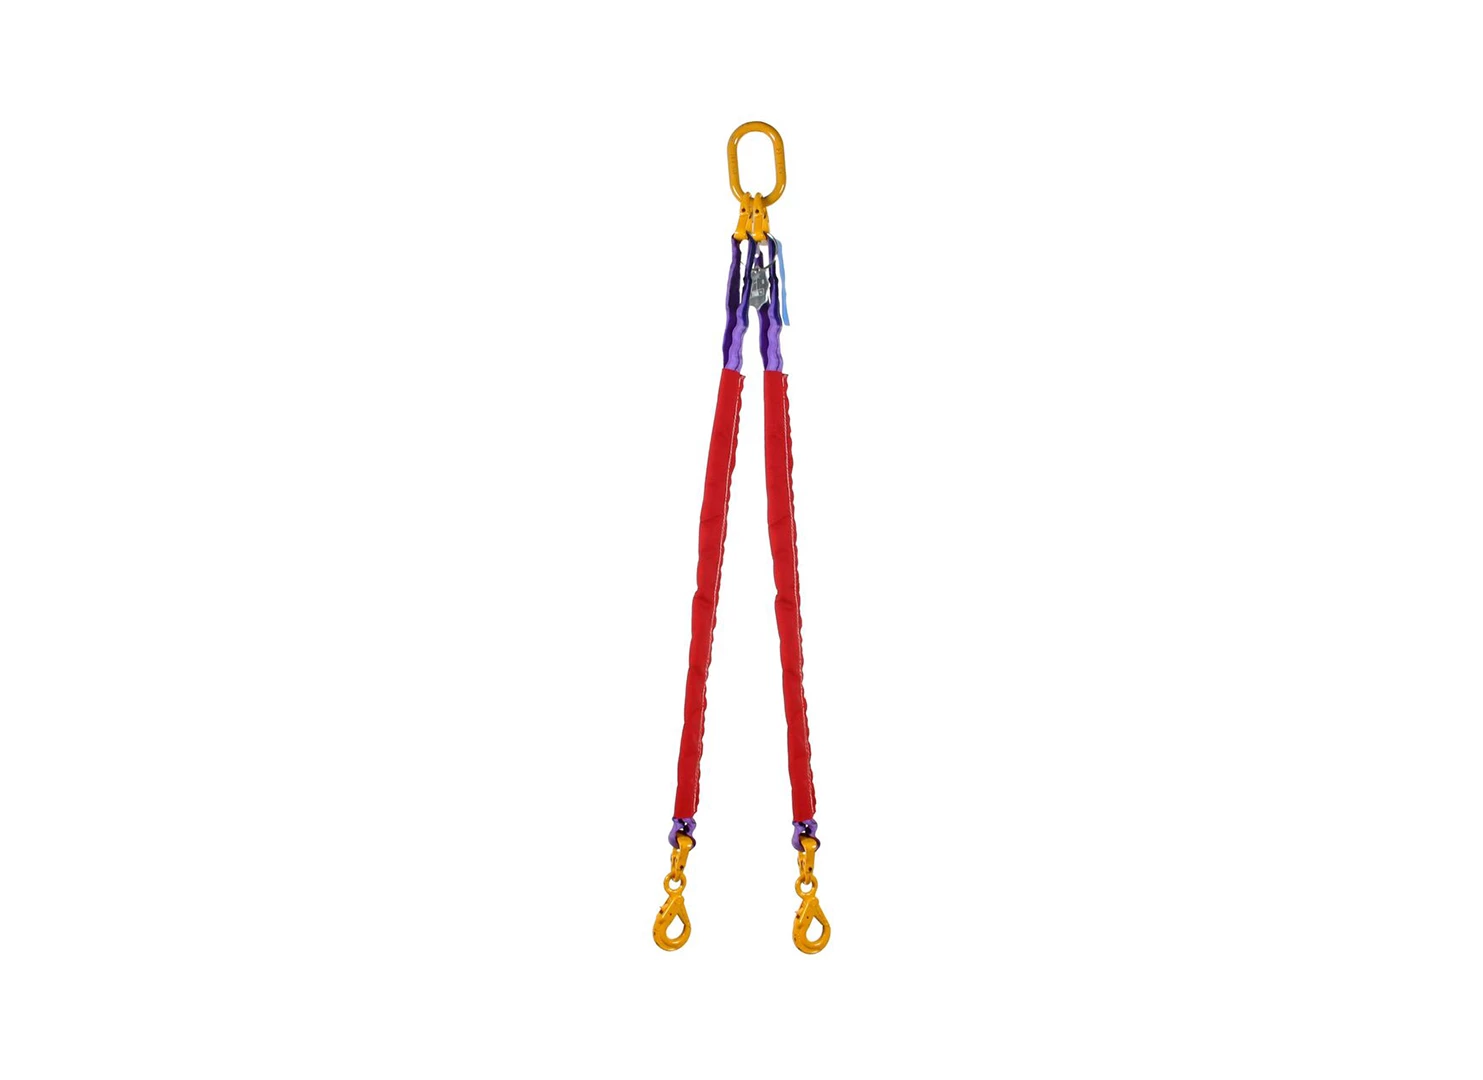 Product: Round slings 1 5t*2,3m